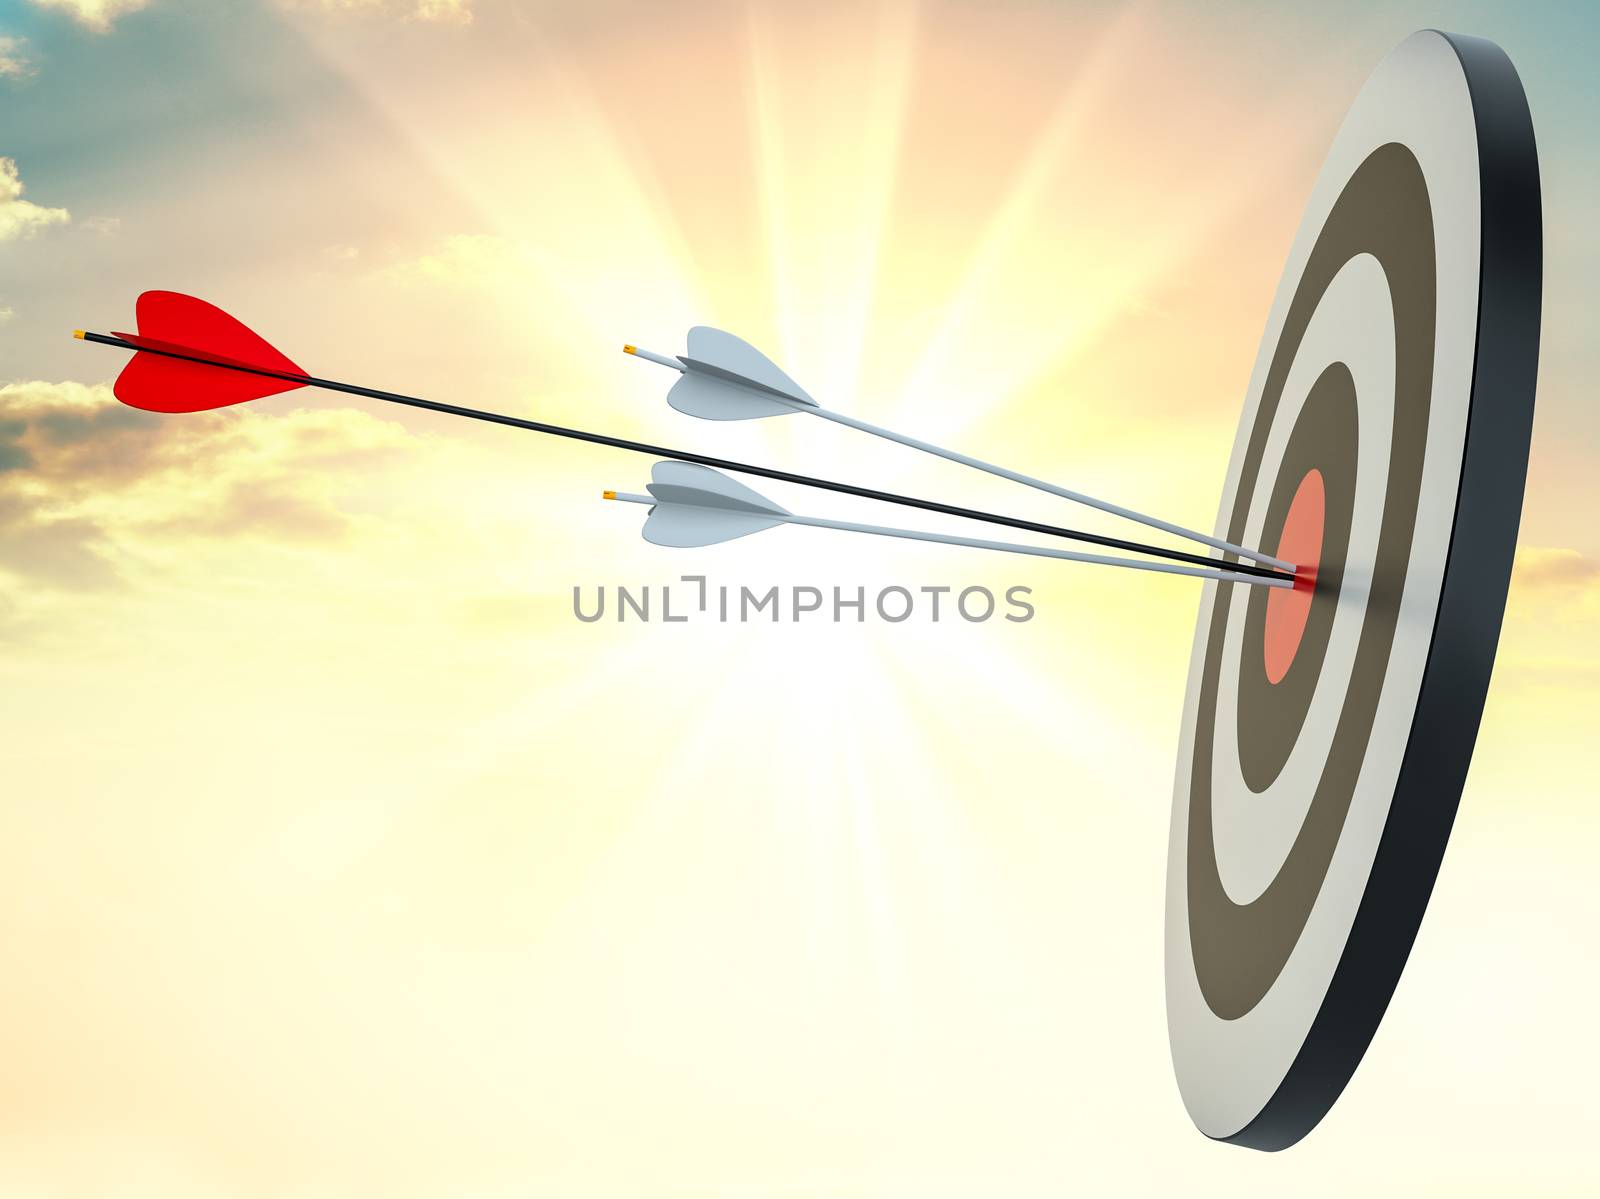 Target hit in center by arrows. 3d illustration. Sunrise on background